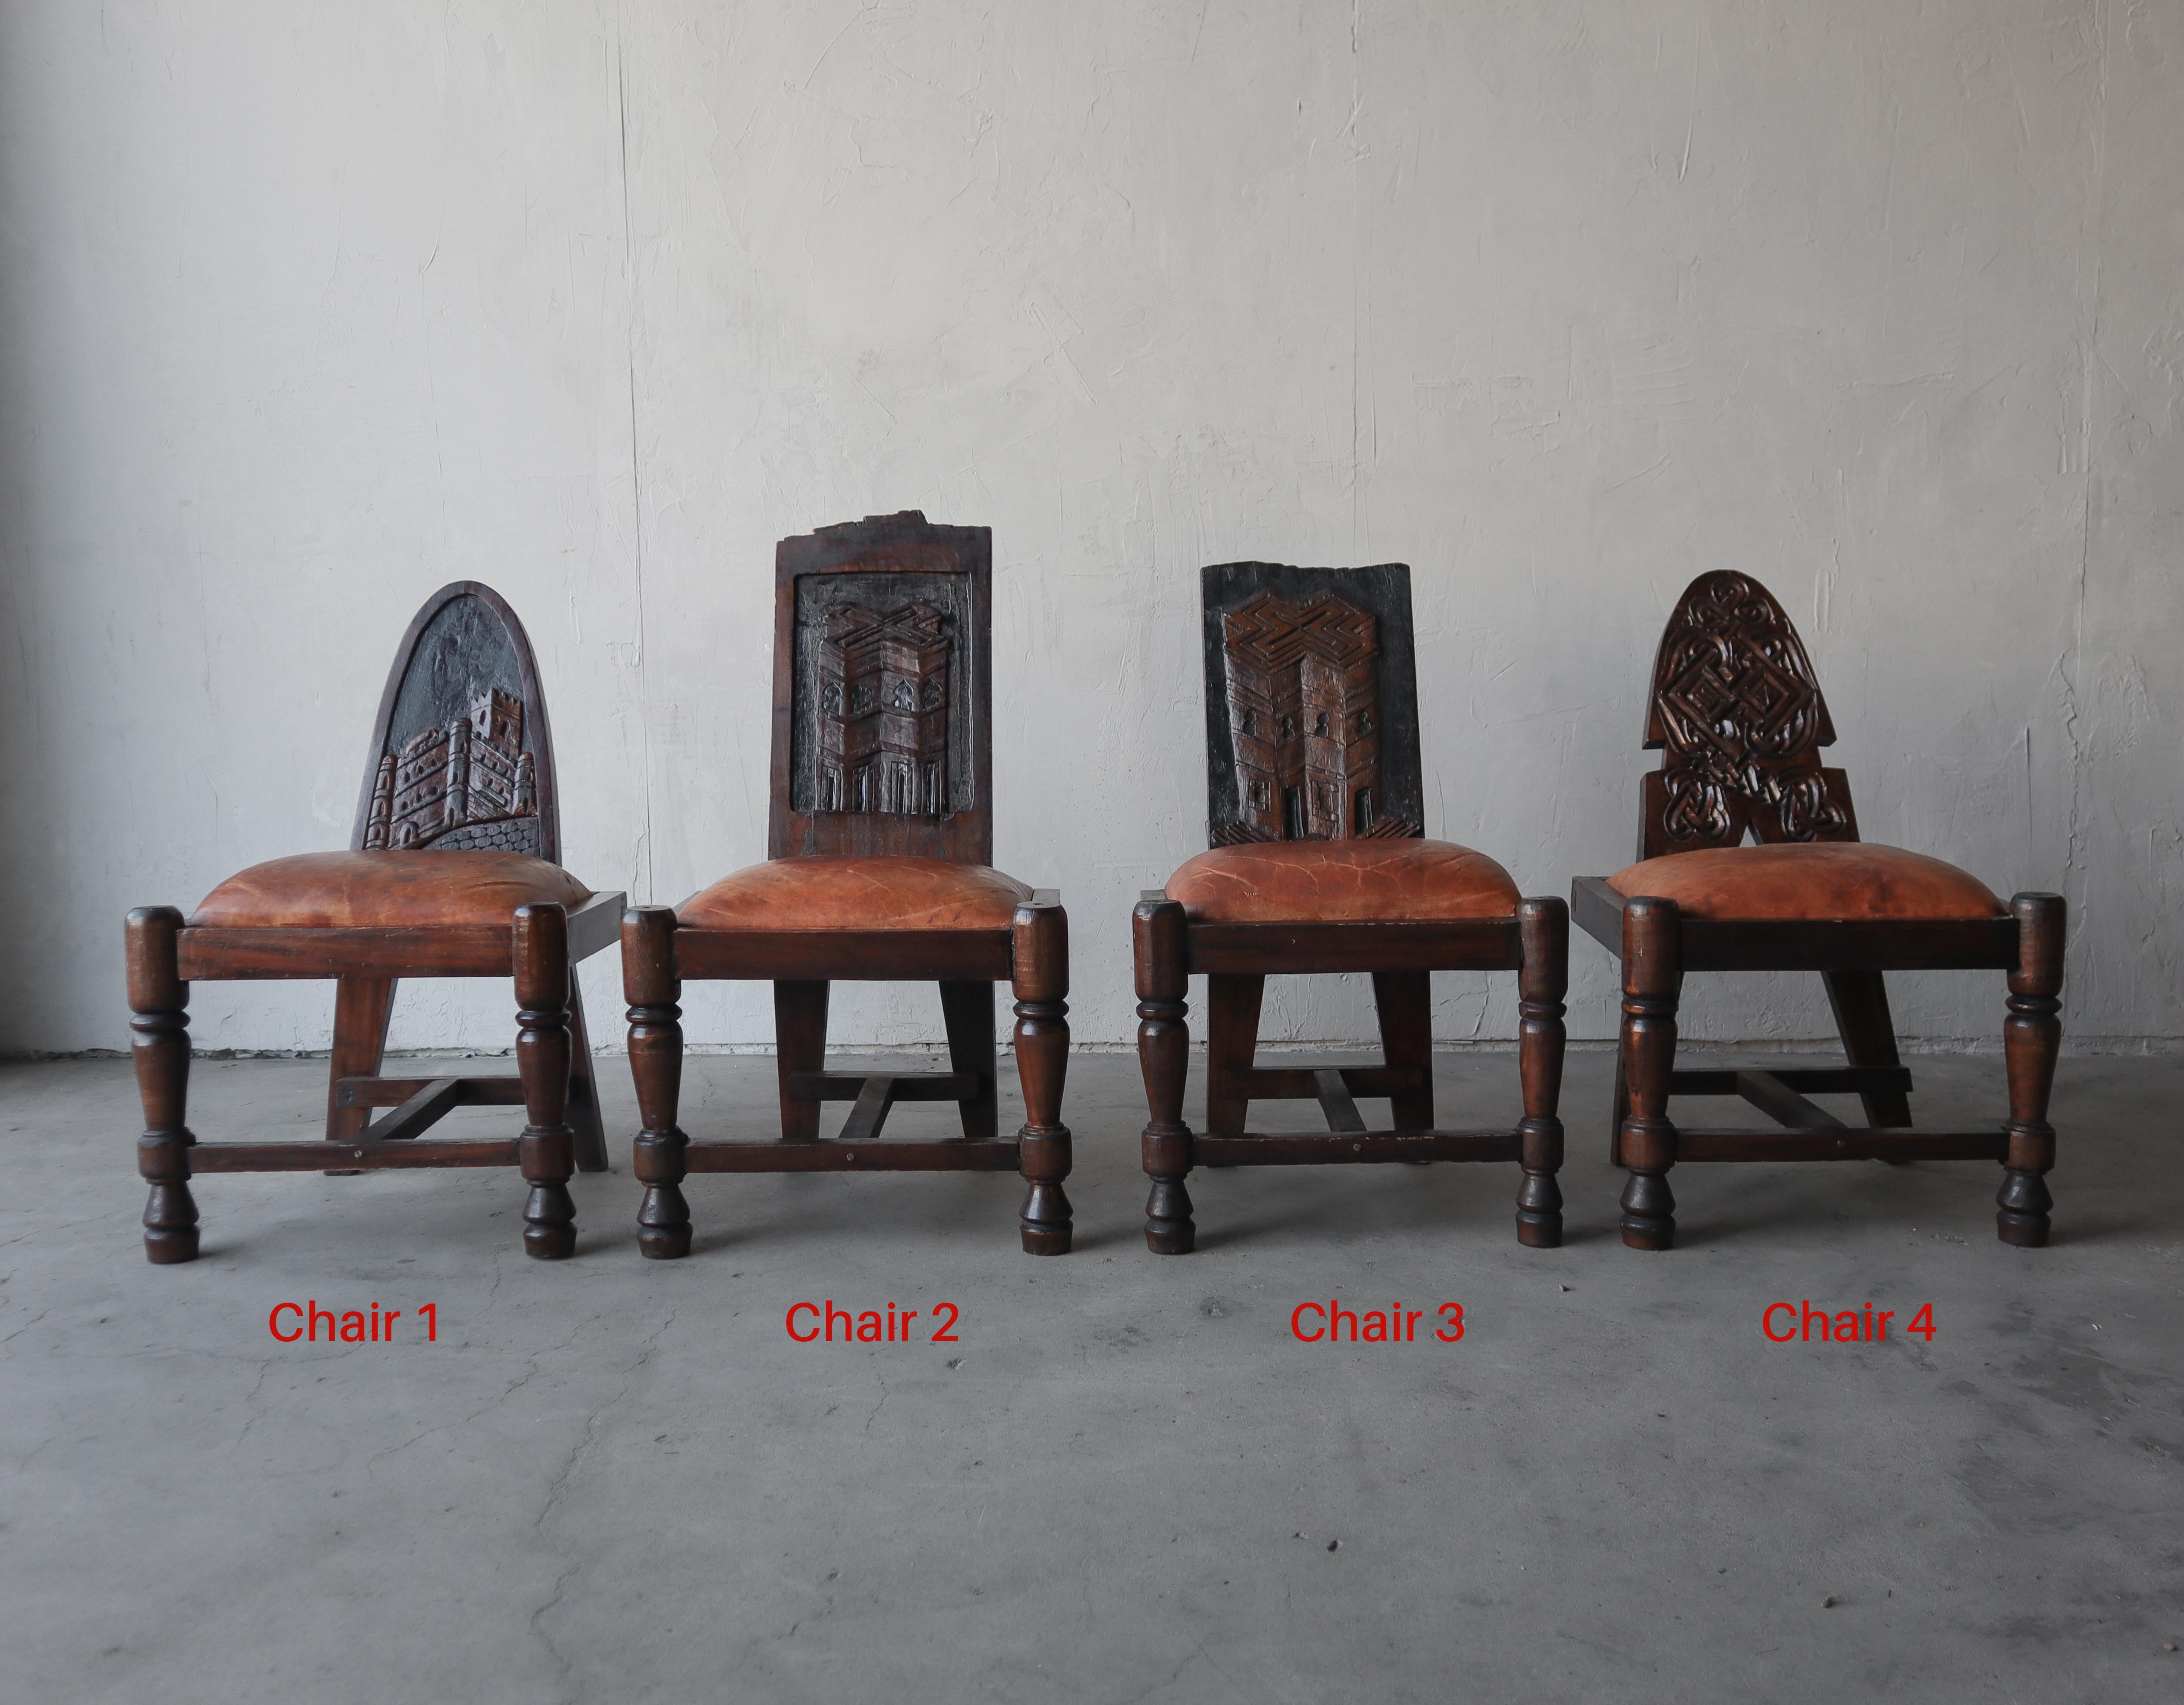 Price is per chair.

Great primitive handmade carved wood and patinated leather chairs. Perfect accent pieces. 

These chairs are super old with all those great primitive details. The leather is beautifully patinaed and the chairs are